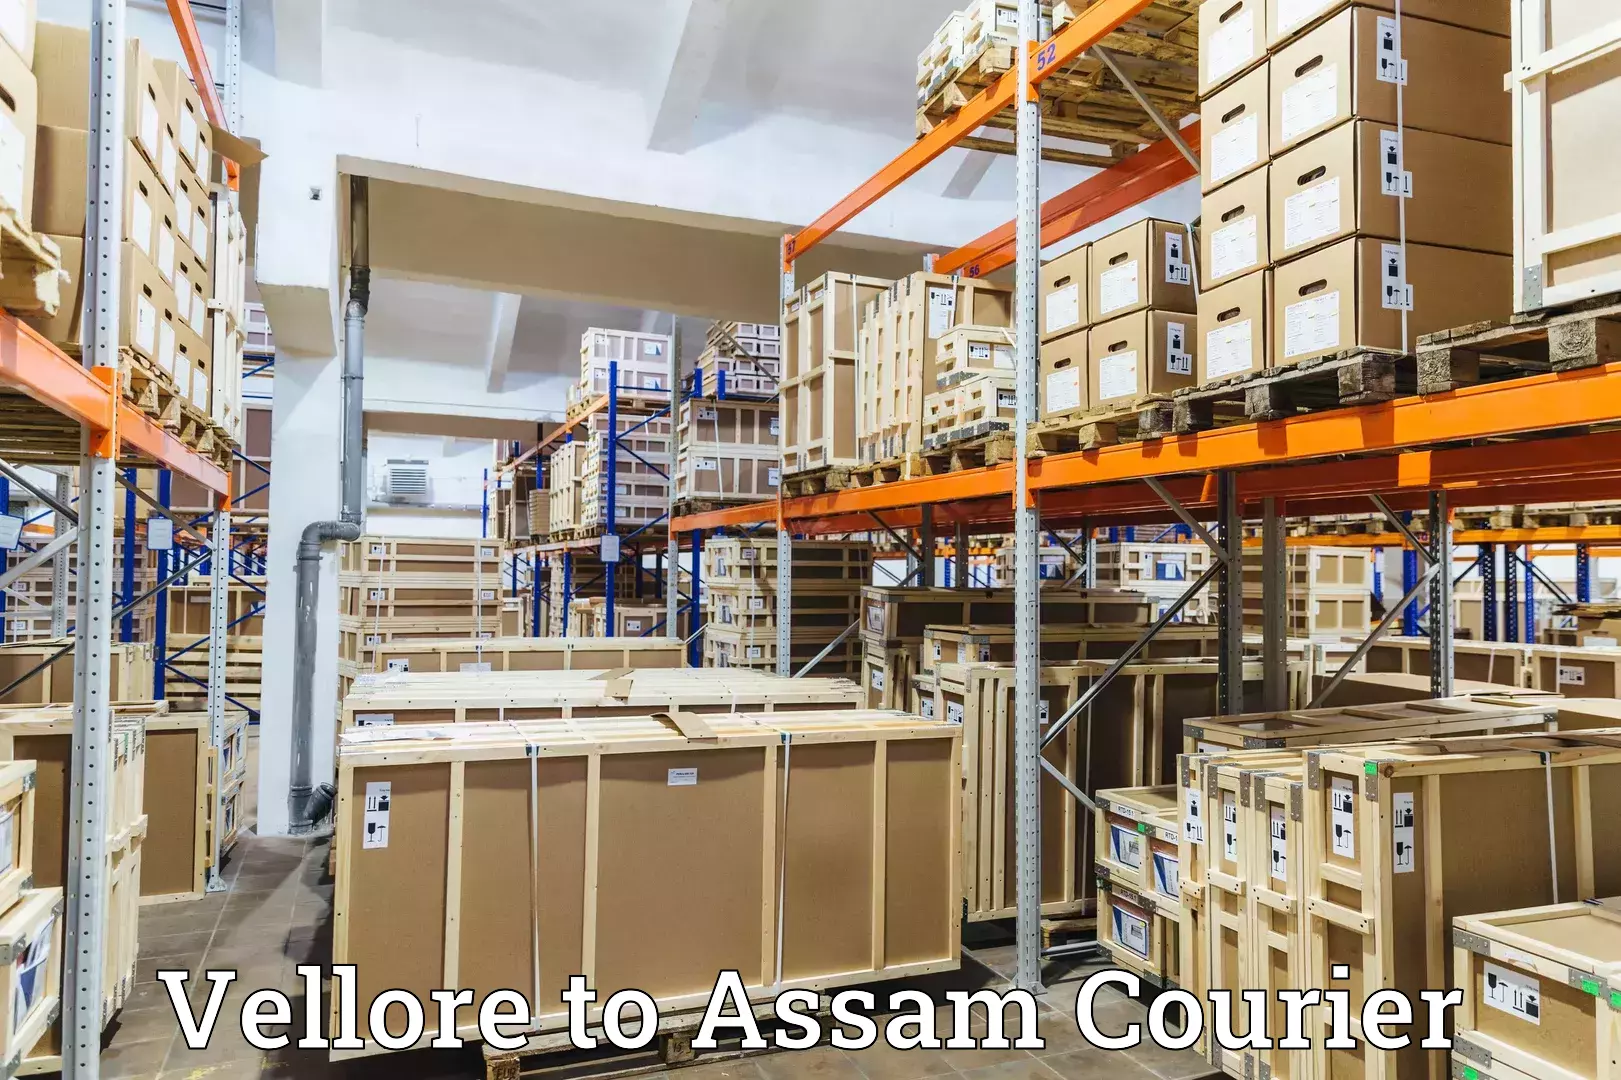 Courier service efficiency Vellore to Assam